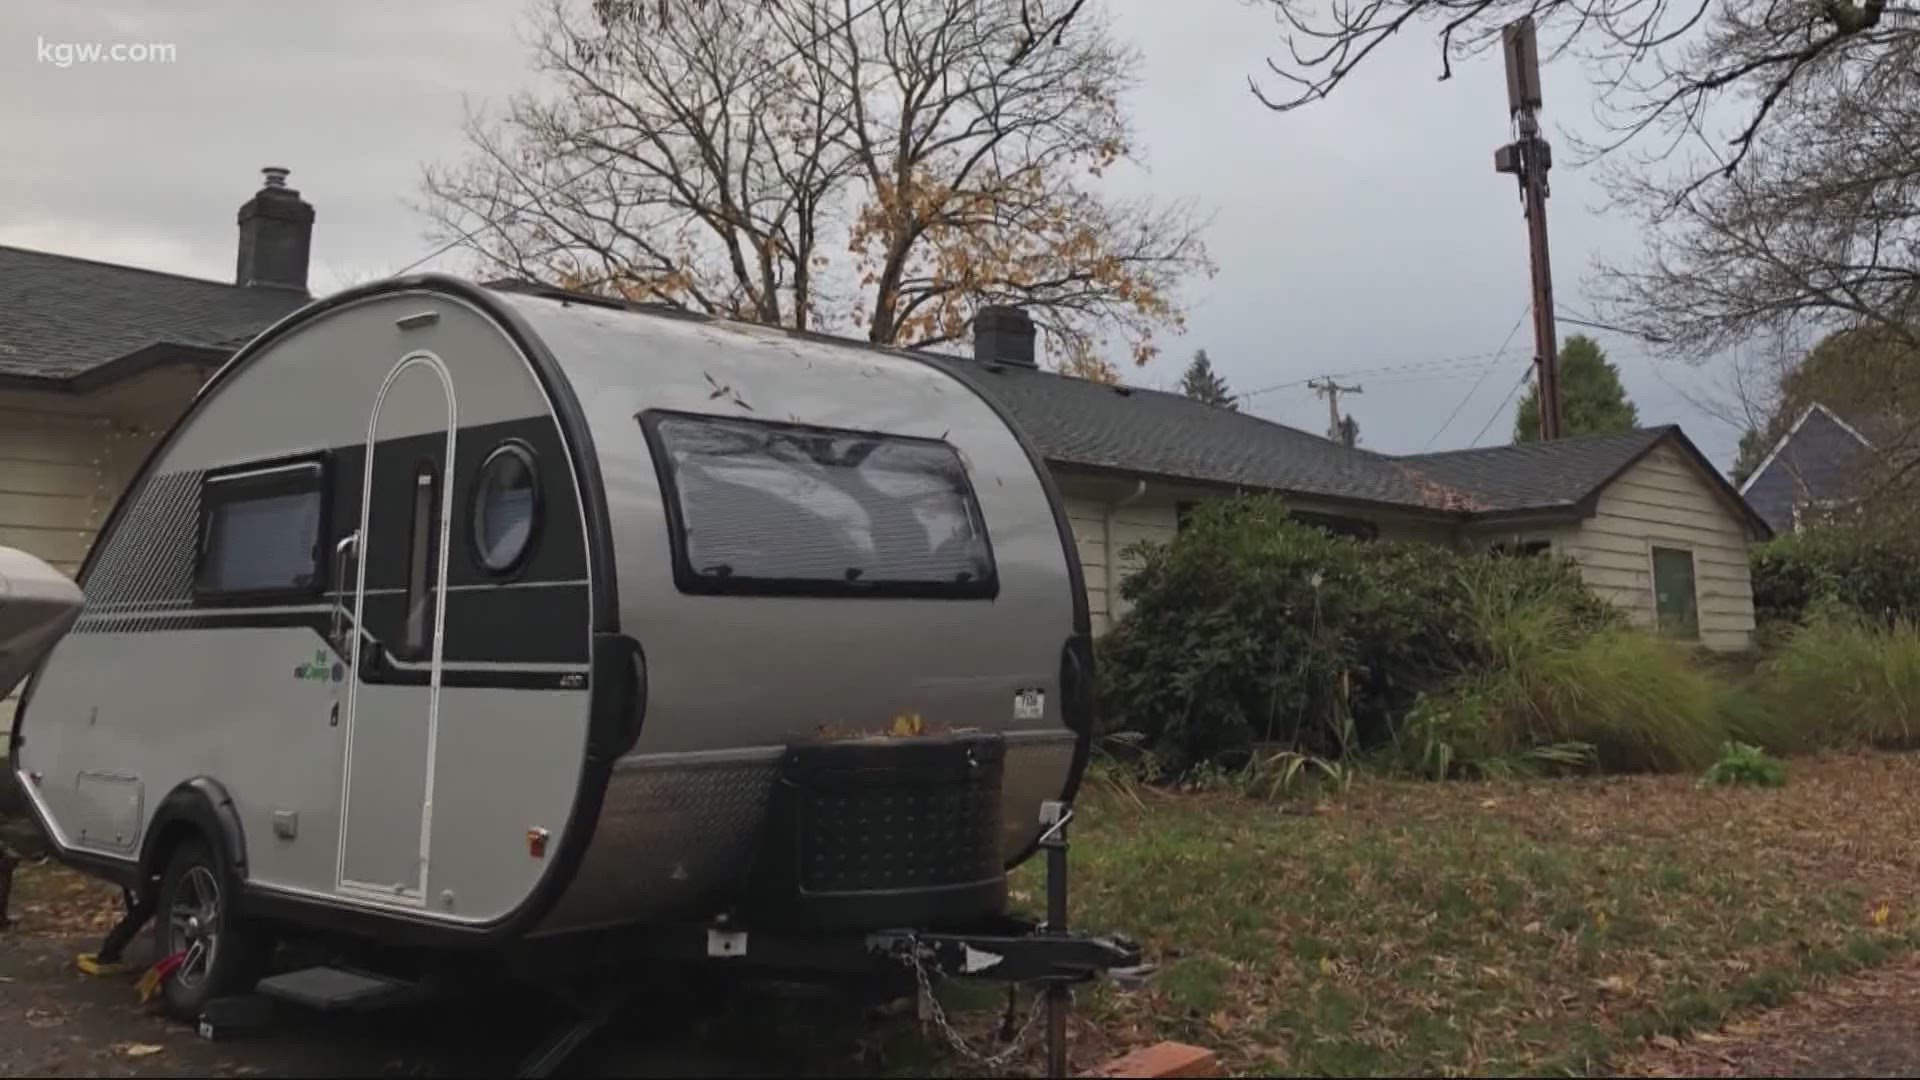 Because she says didn't feel safe physically working in a school building, her workspace is now a tiny teardrop trailer conveniently parked in her driveway.